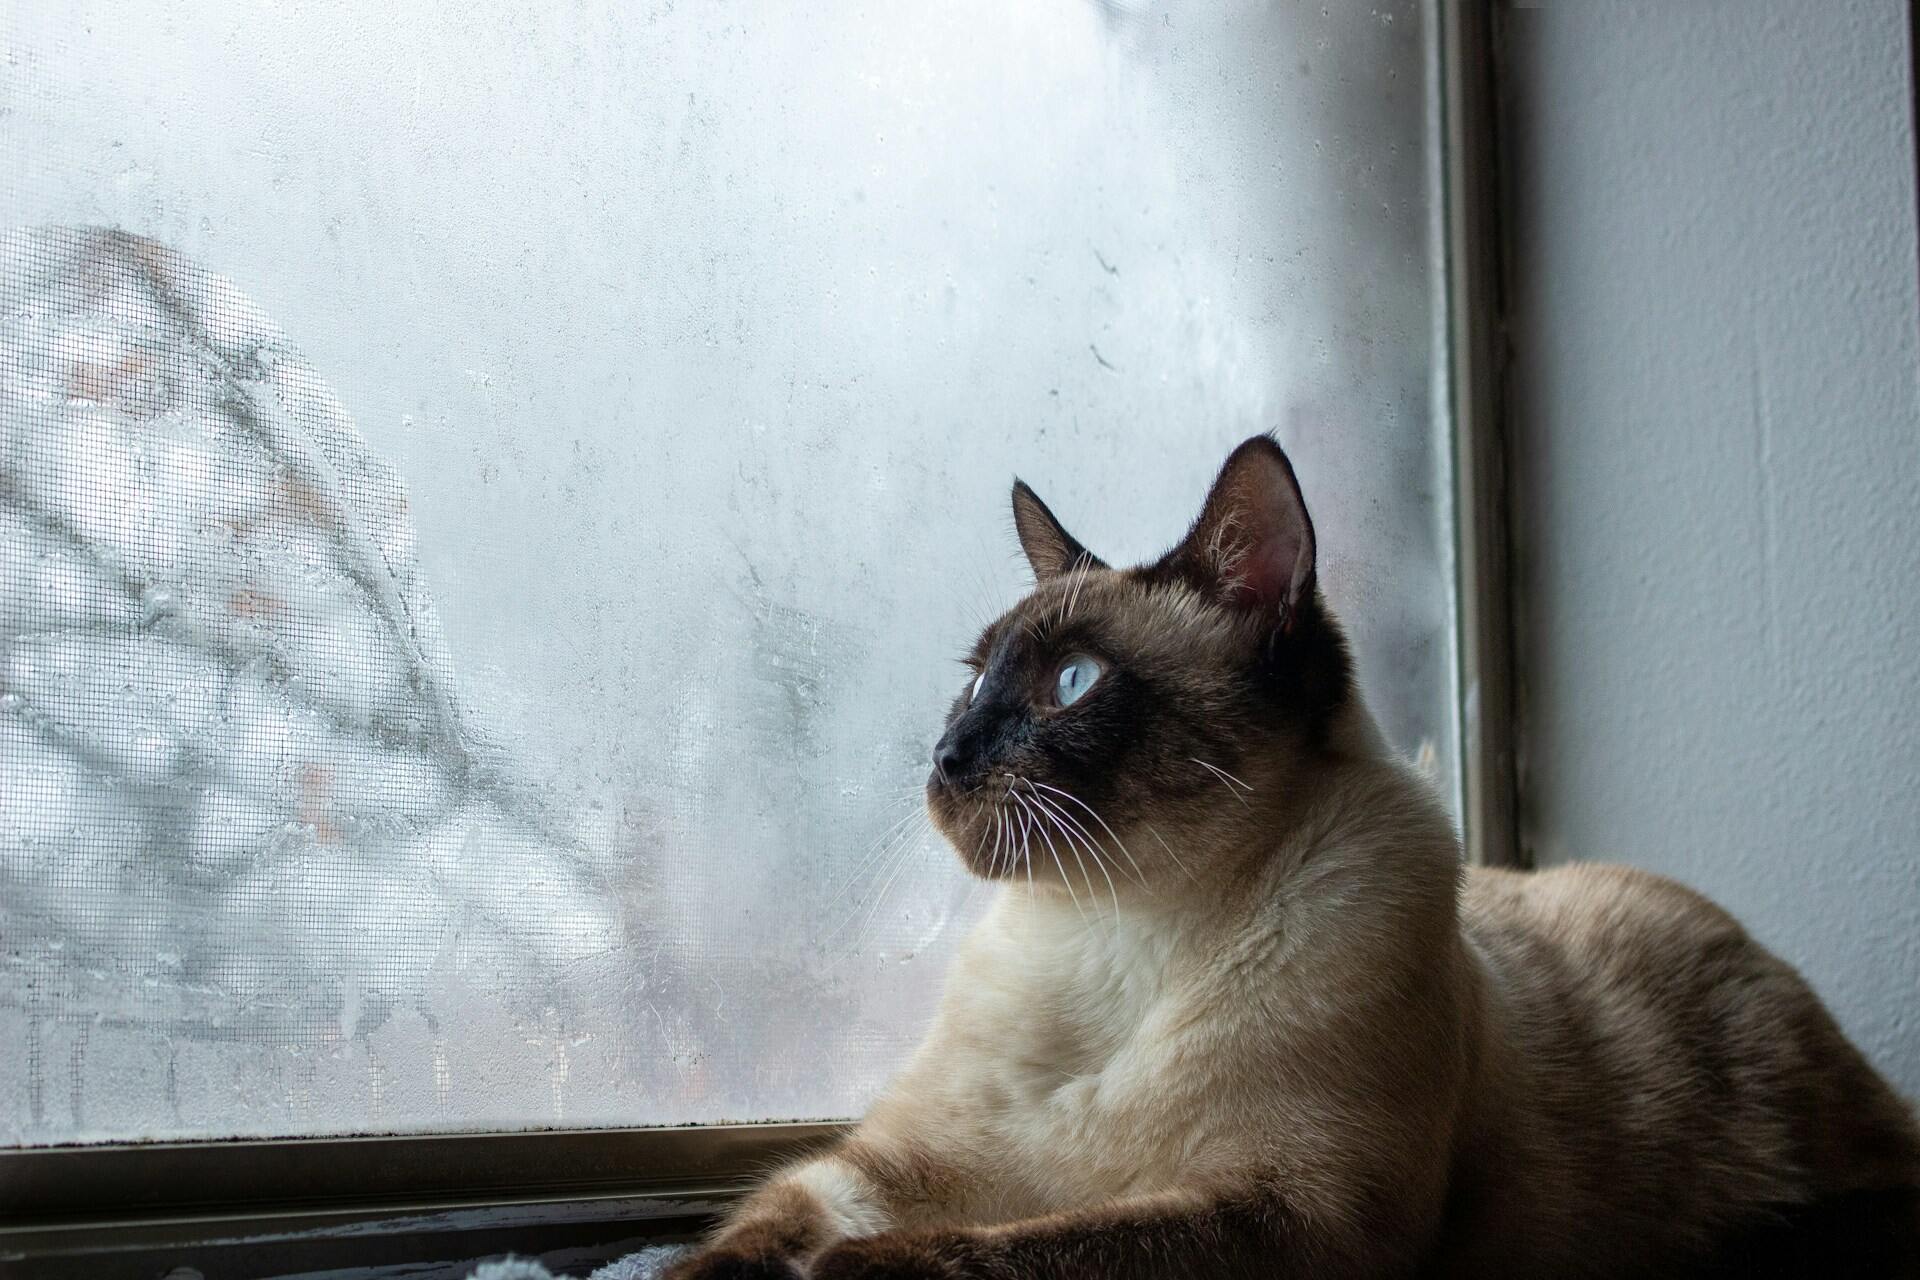 A blue-eyed Siamese cat sitting by a window indoors